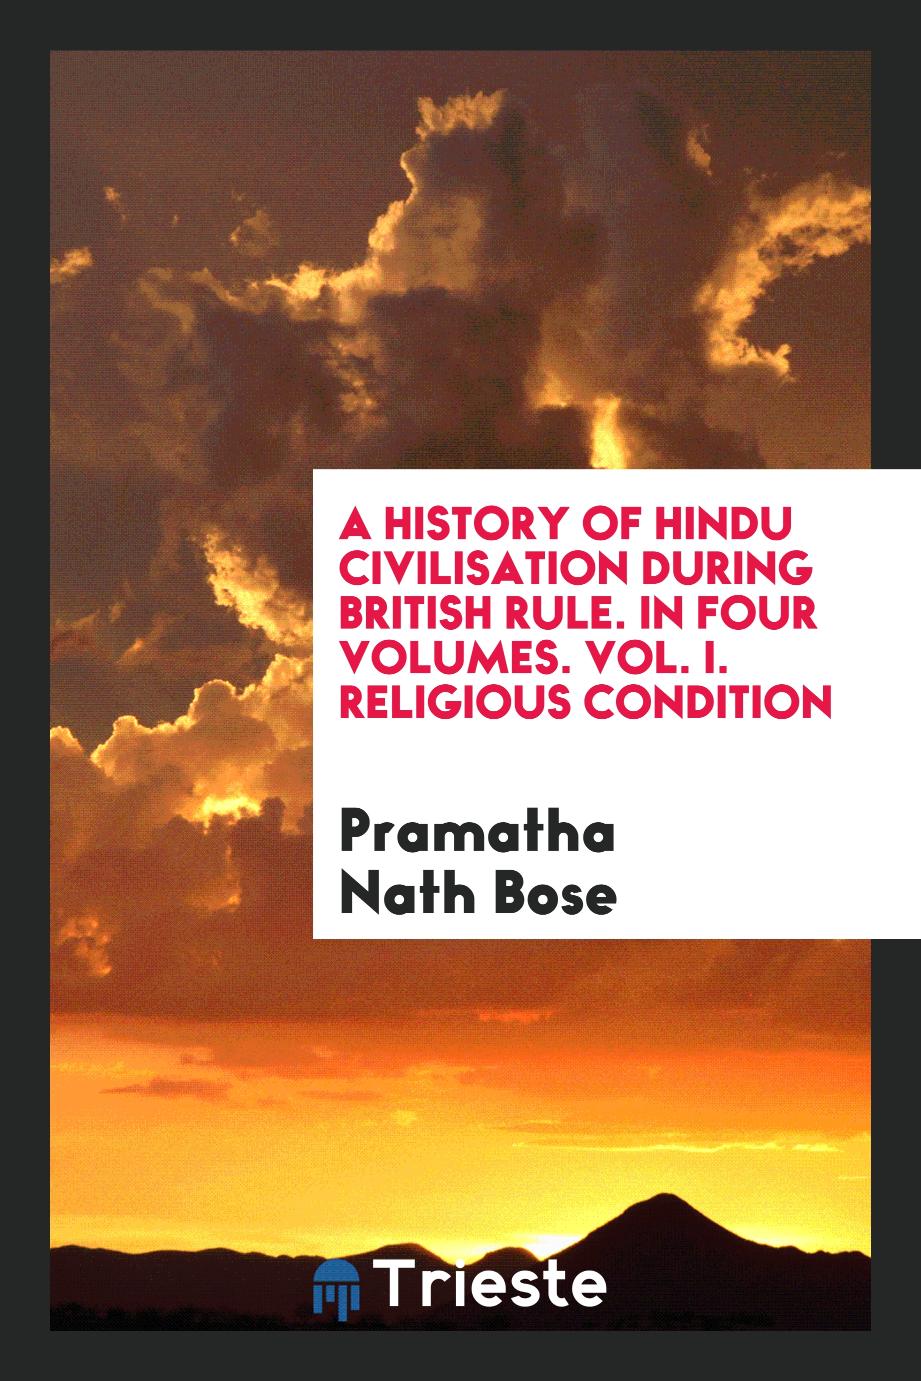 A History of Hindu Civilisation during British Rule. In Four Volumes. Vol. I. Religious Condition